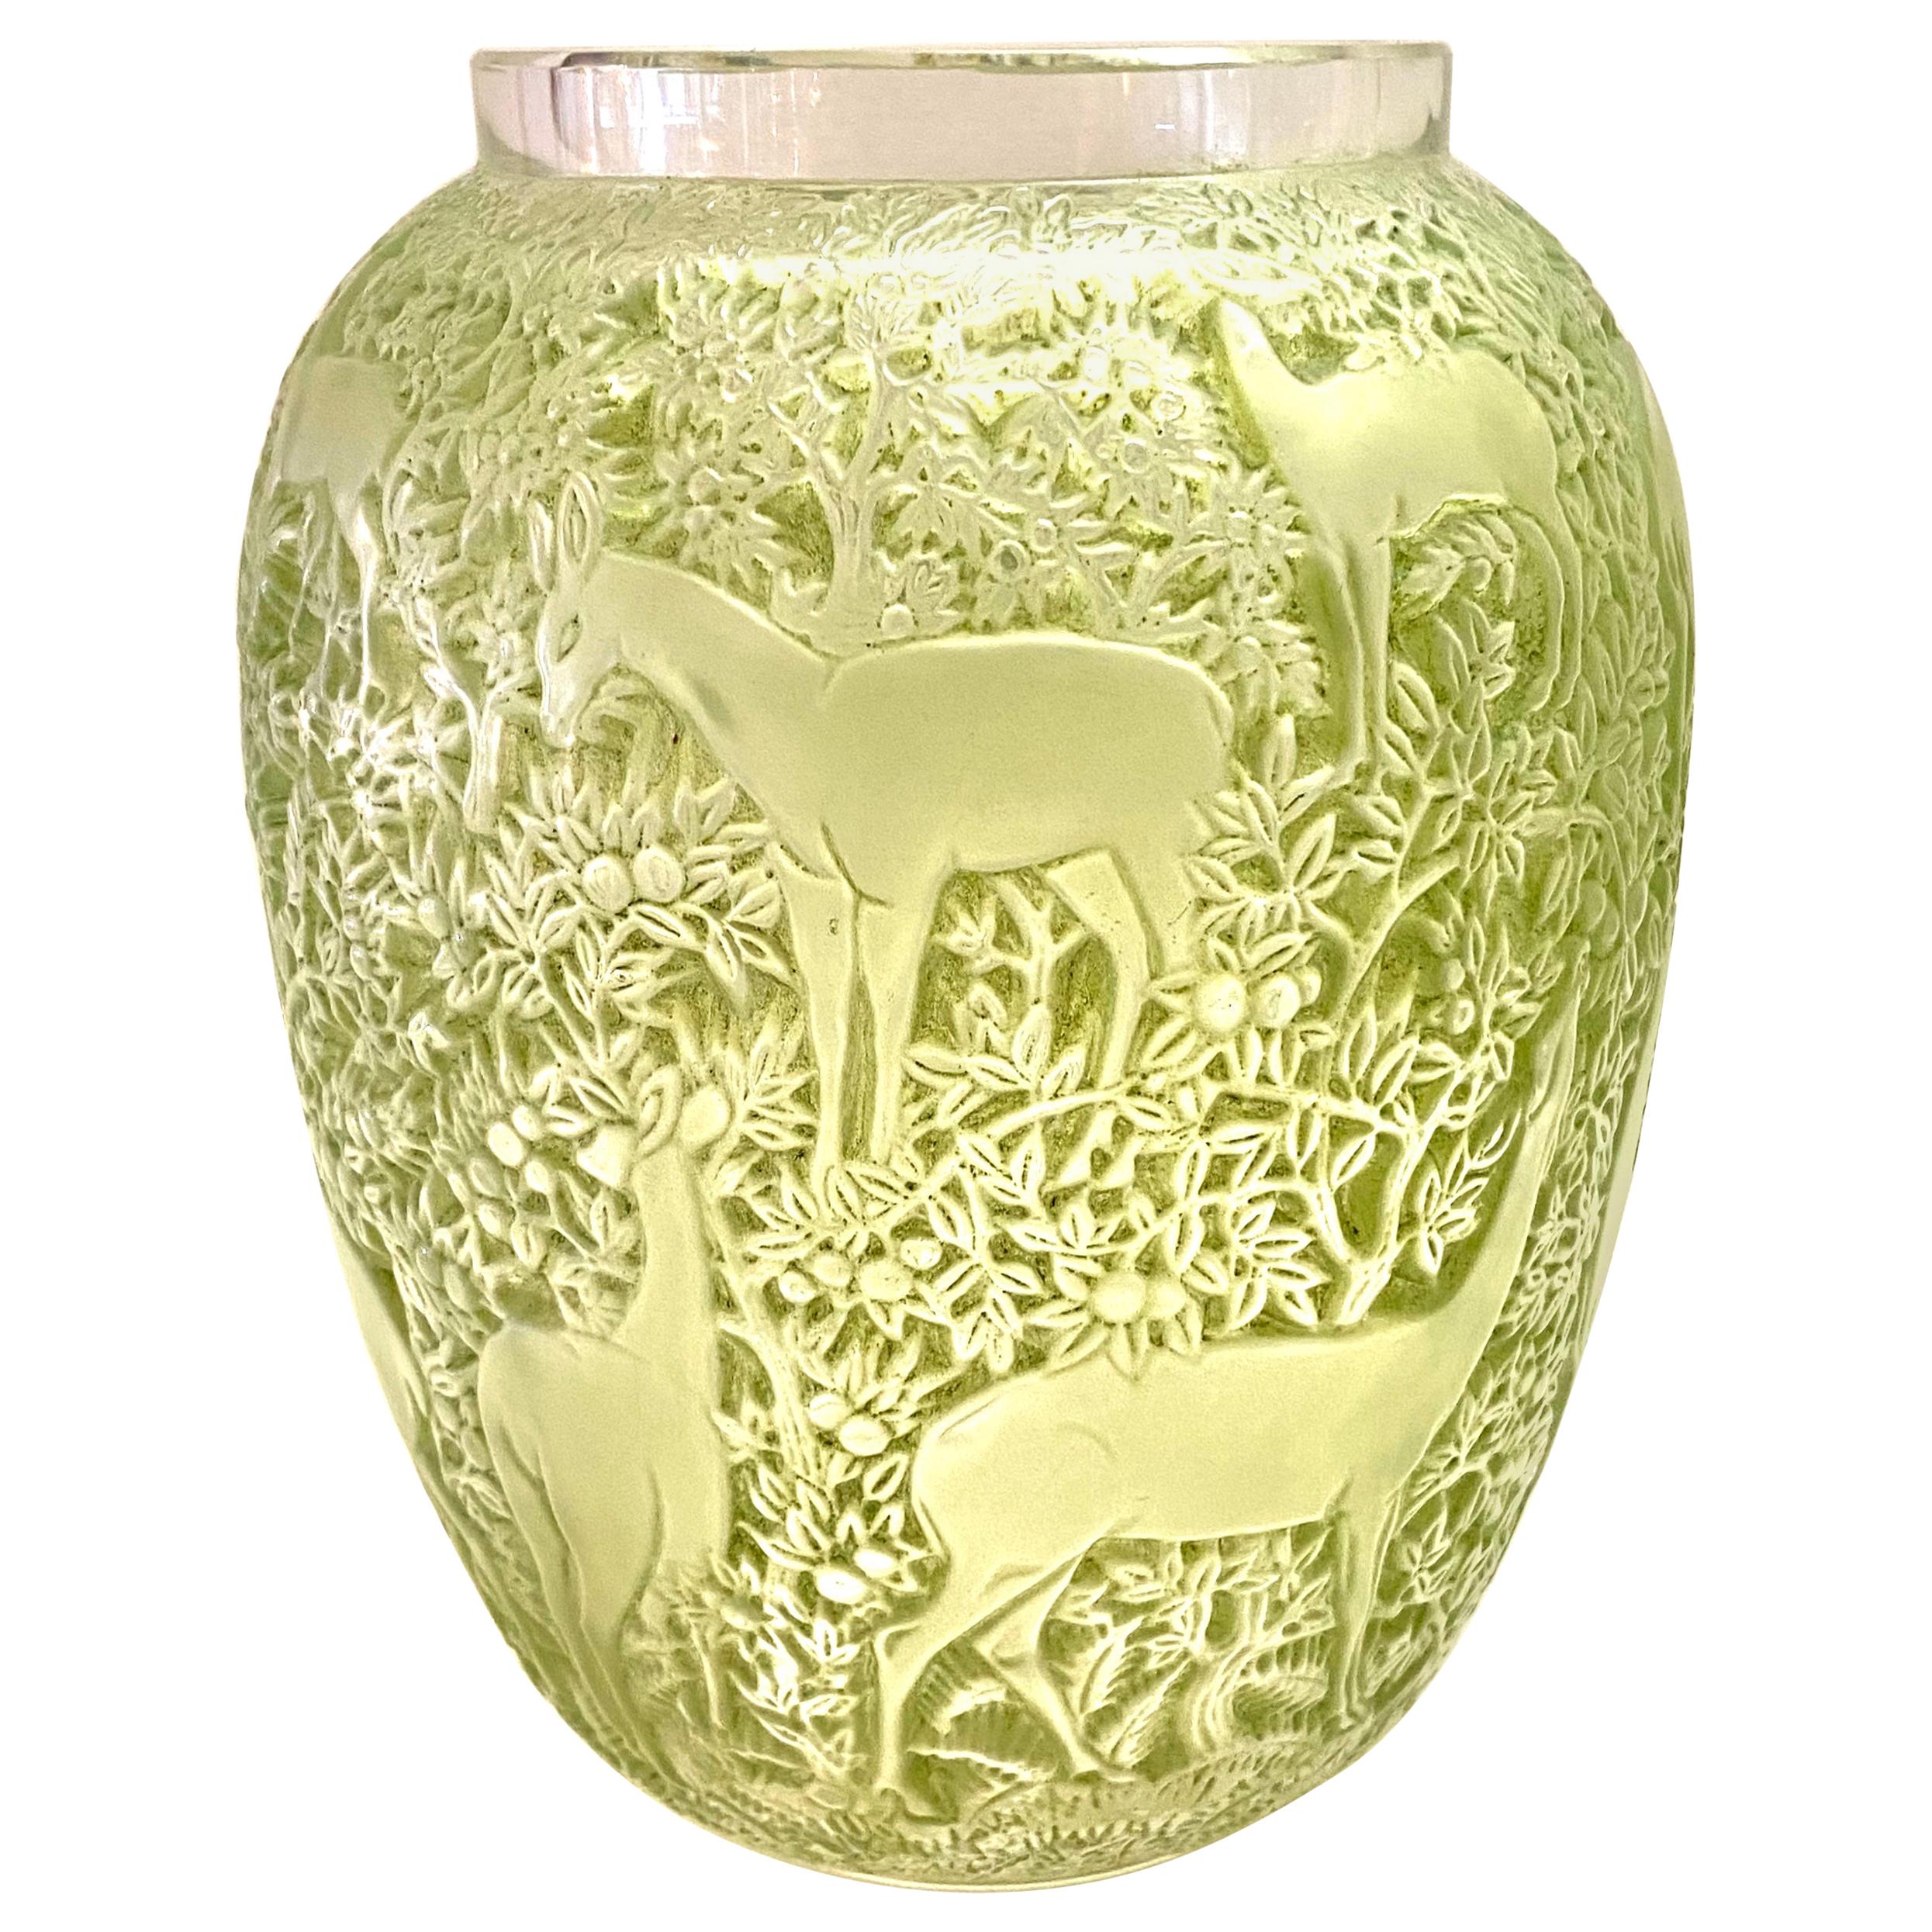 1932 René Lalique Original Biches Vase in Frosted Glass with Green Patina